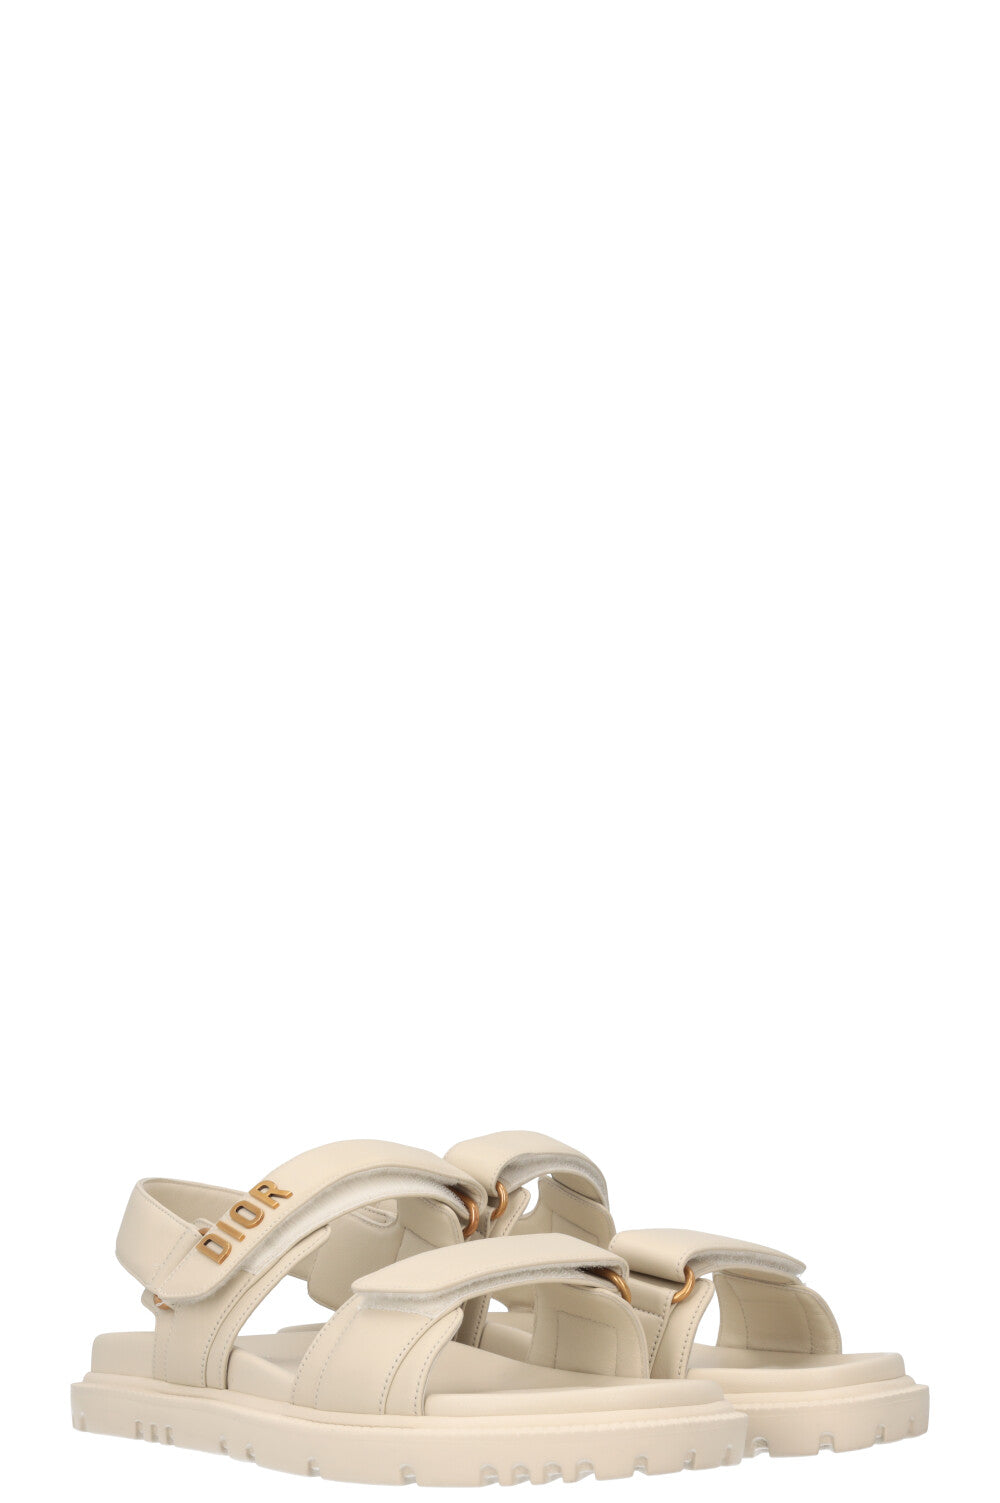 CHRISTIAN DIOR Dioract Sandals Off White